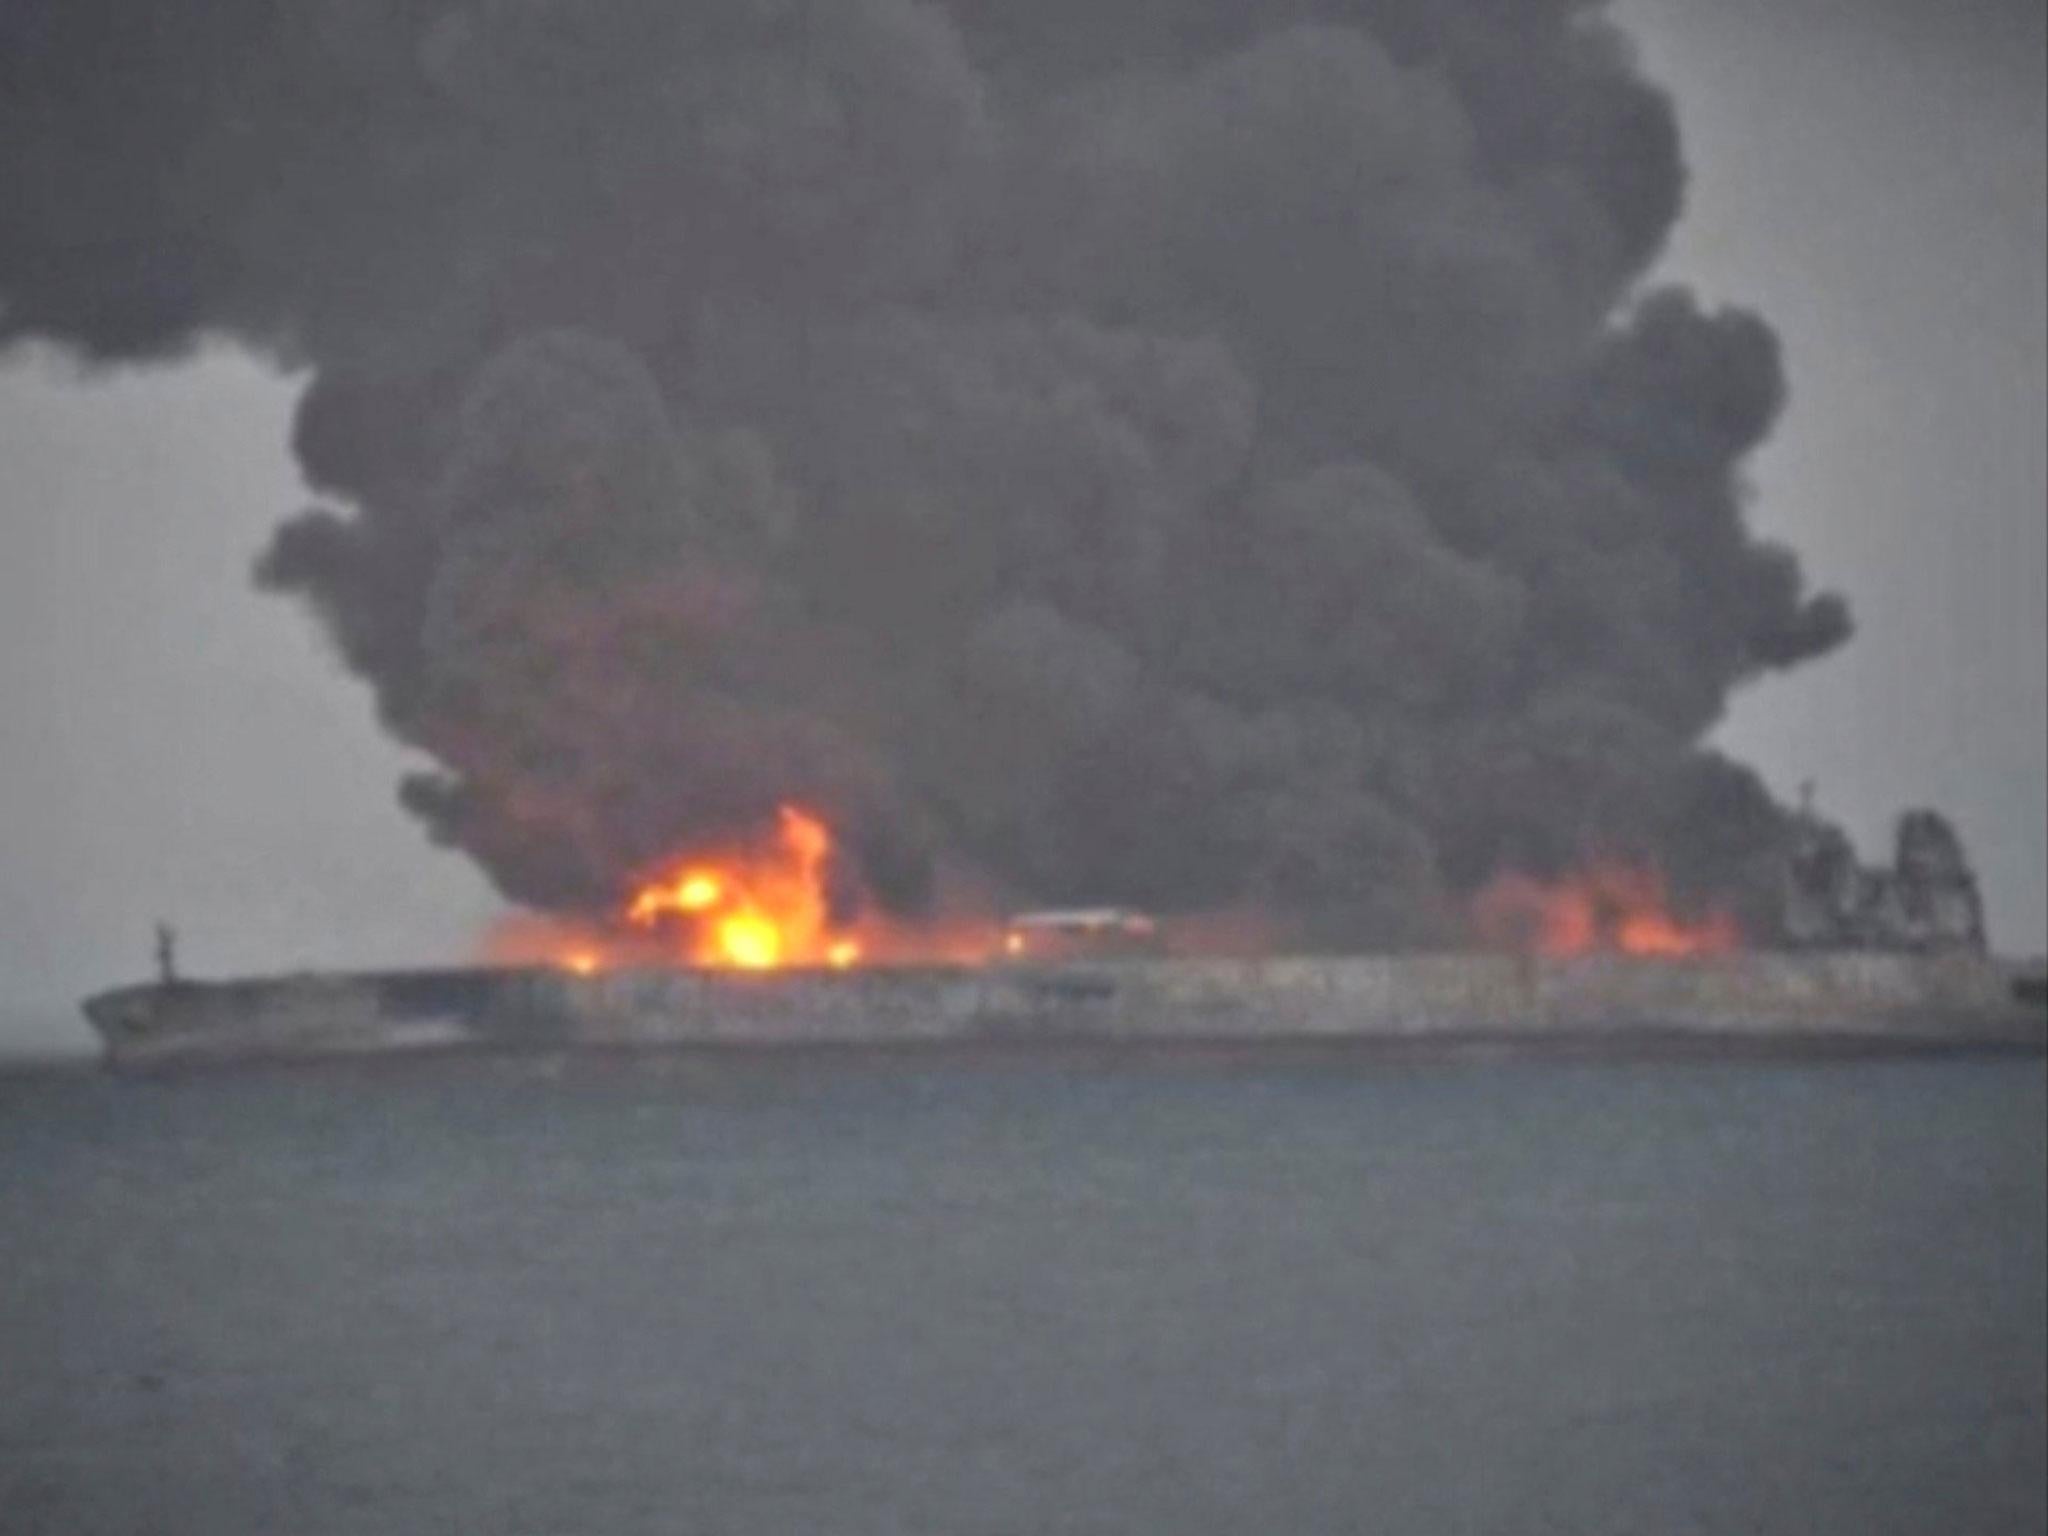 The tanker Sanchi has been ablaze since it collided with a cargo ship in the East China Sea